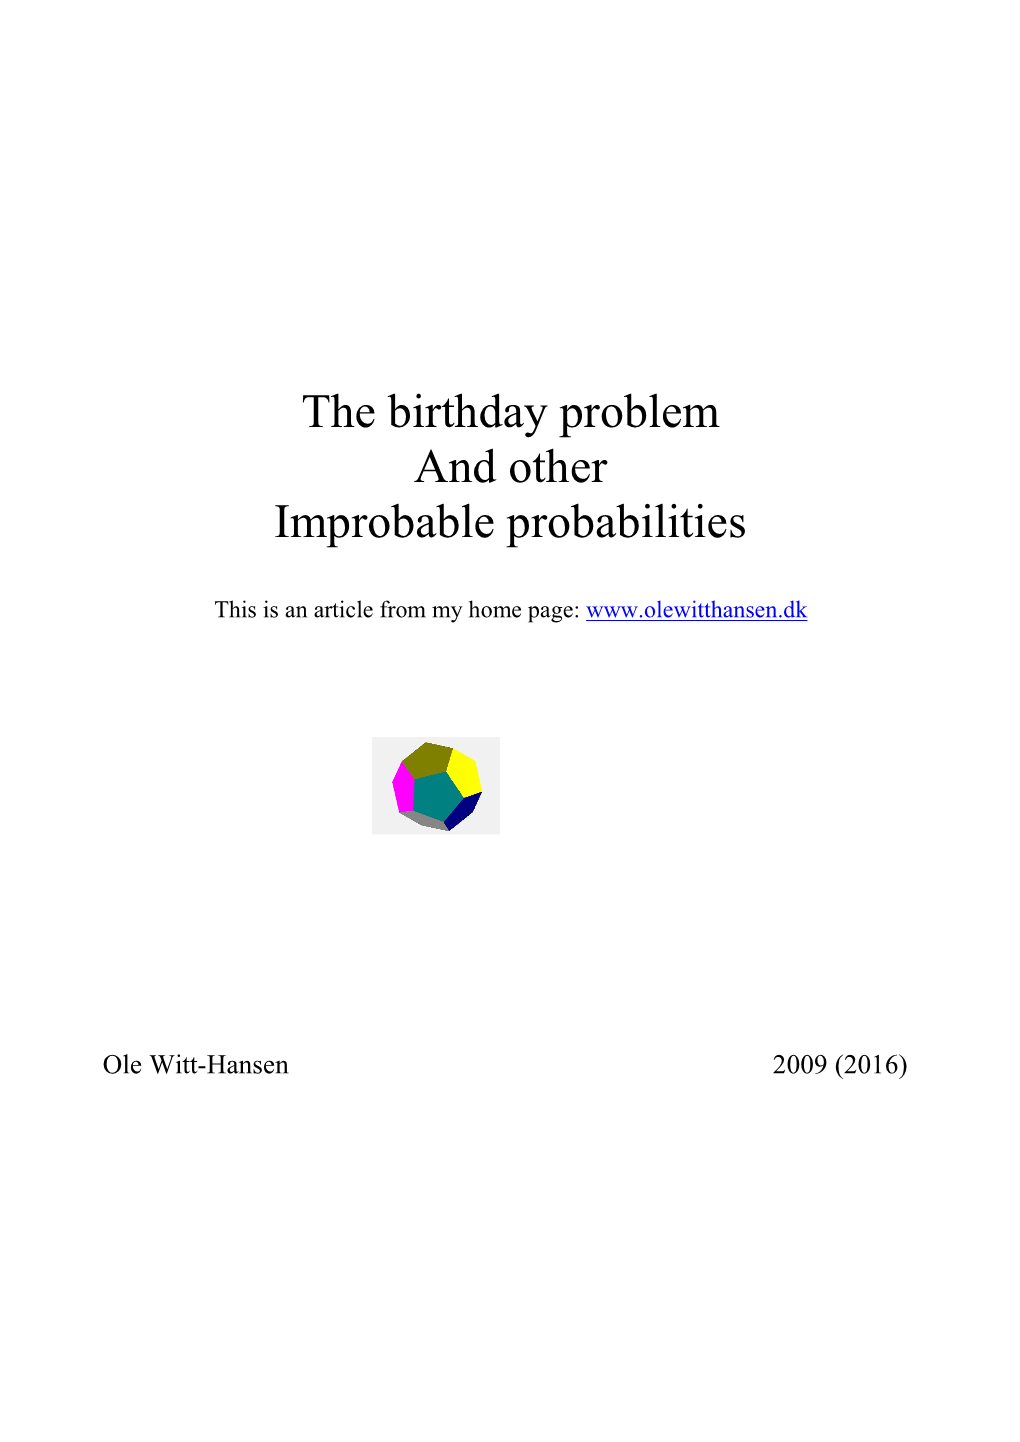 The Birthday Problem and Other Improbable Probabilities